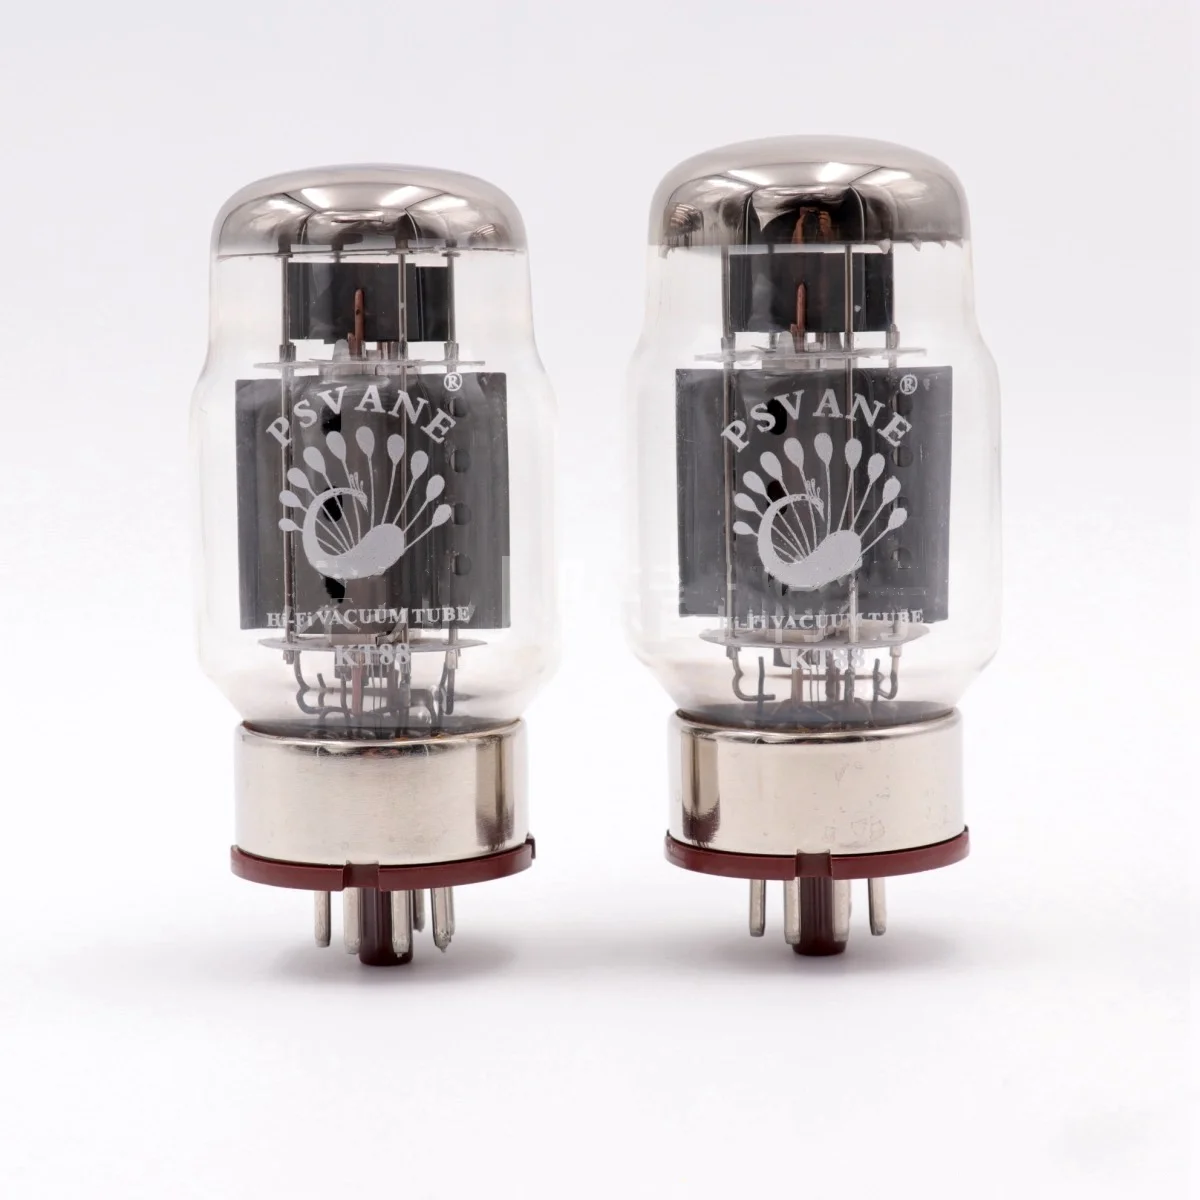 

T-010 Matched Pair Quad PSVANE Vacuum Tube KT88 Replace 6550 for Hifi Audio Vintage Tube Amplifier DIY Tested by factory